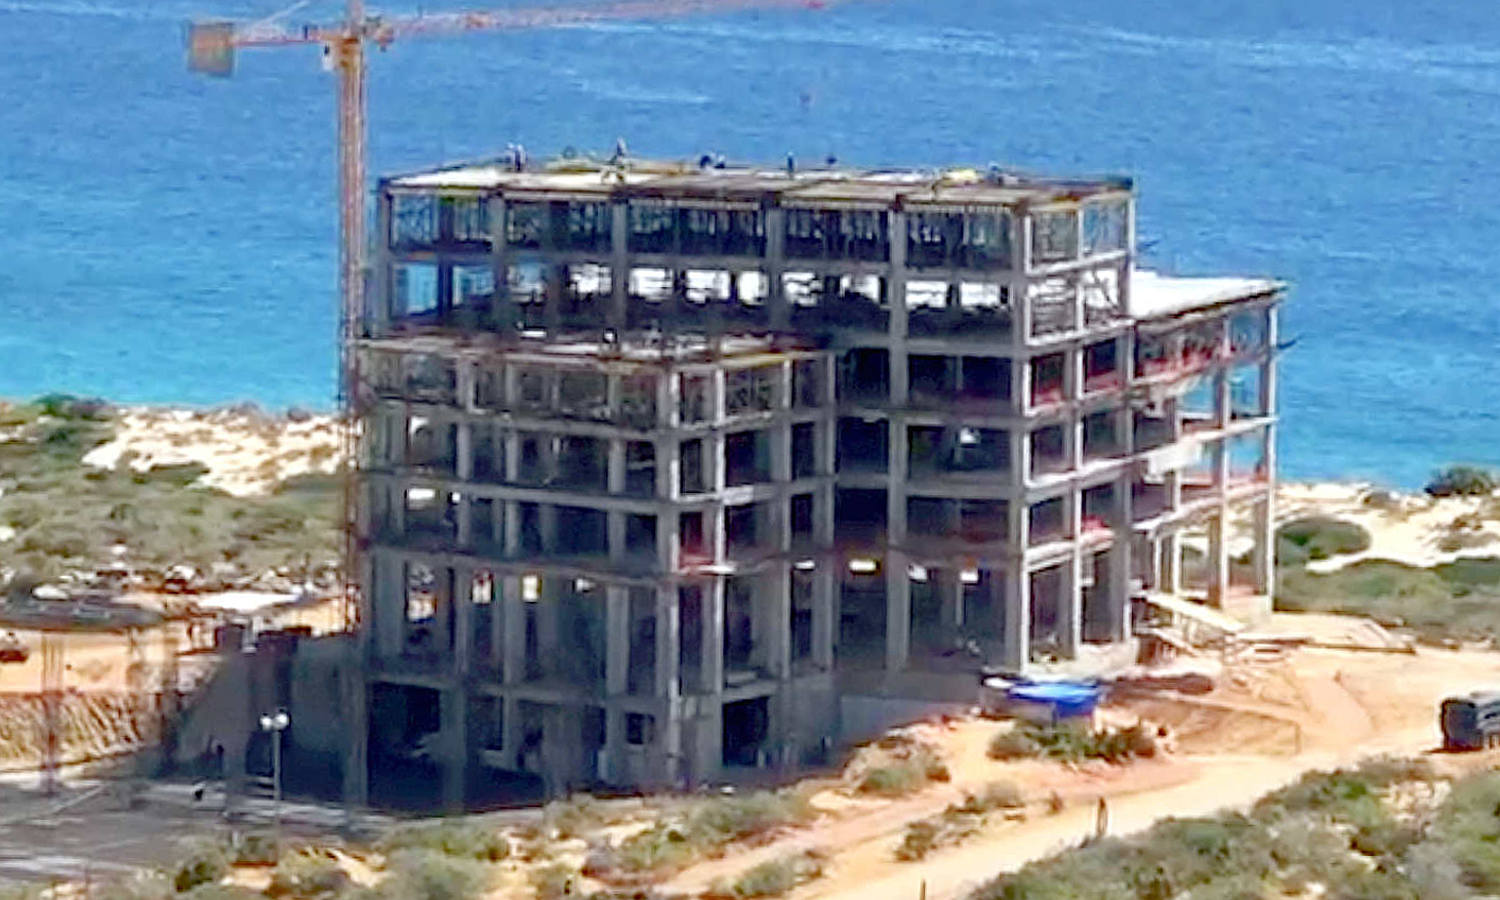 East Cape is for real.  Construction is underway.  Three towers near the beach, with one tower at its final height.  Open in 2019?  Maybe 2020?  Stay tuned....Subscribers View - 2/22/19